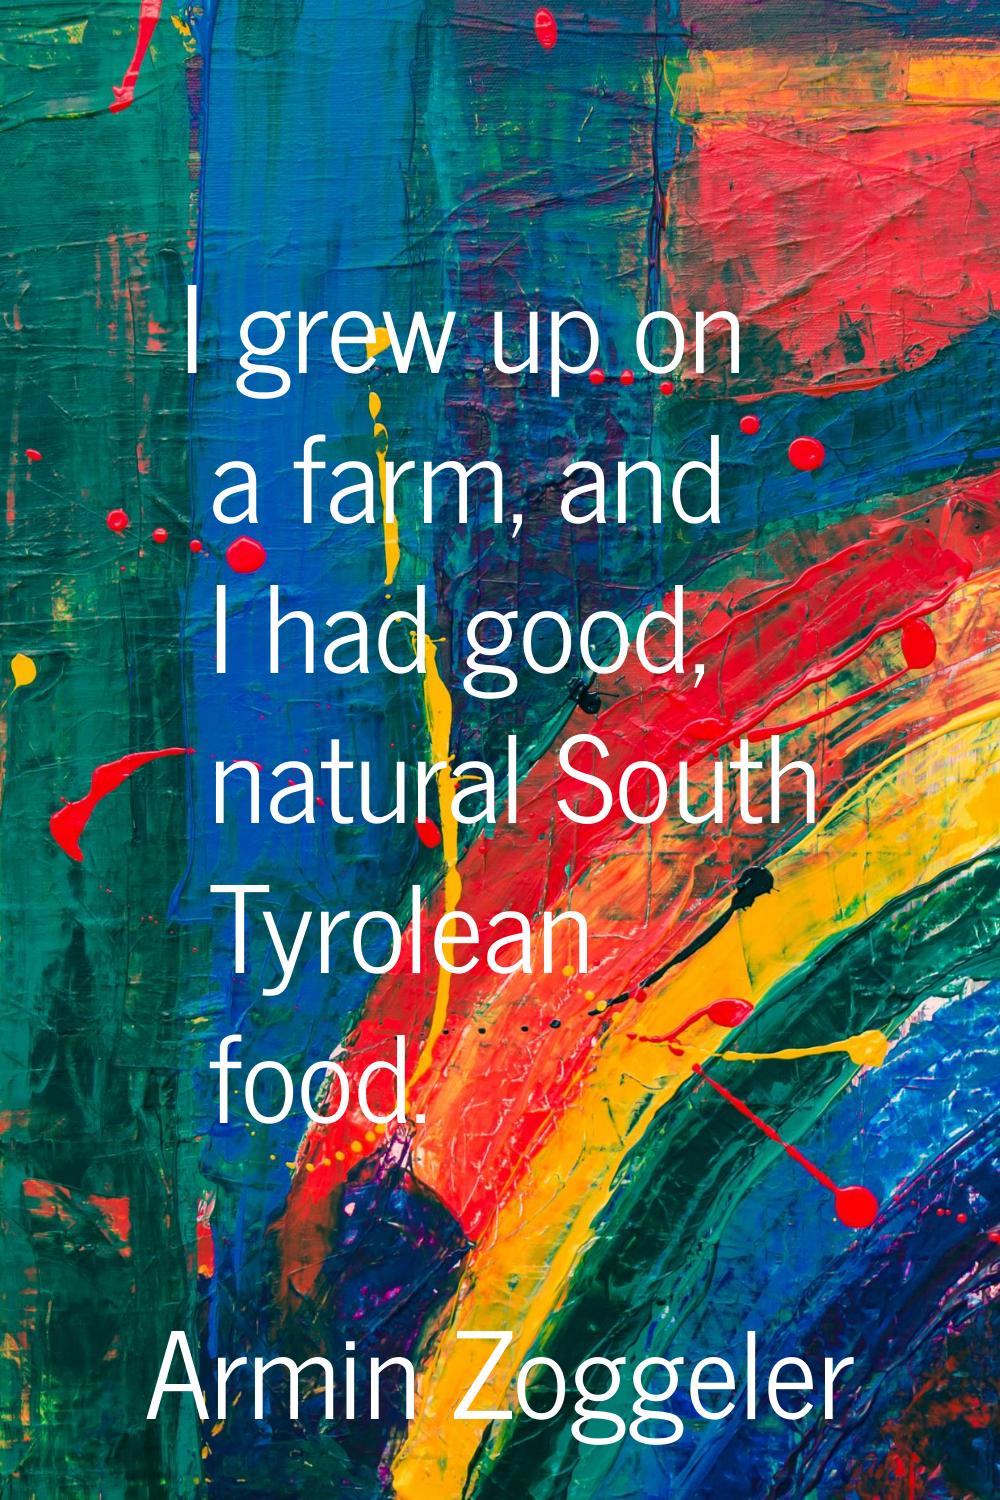 I grew up on a farm, and I had good, natural South Tyrolean food.